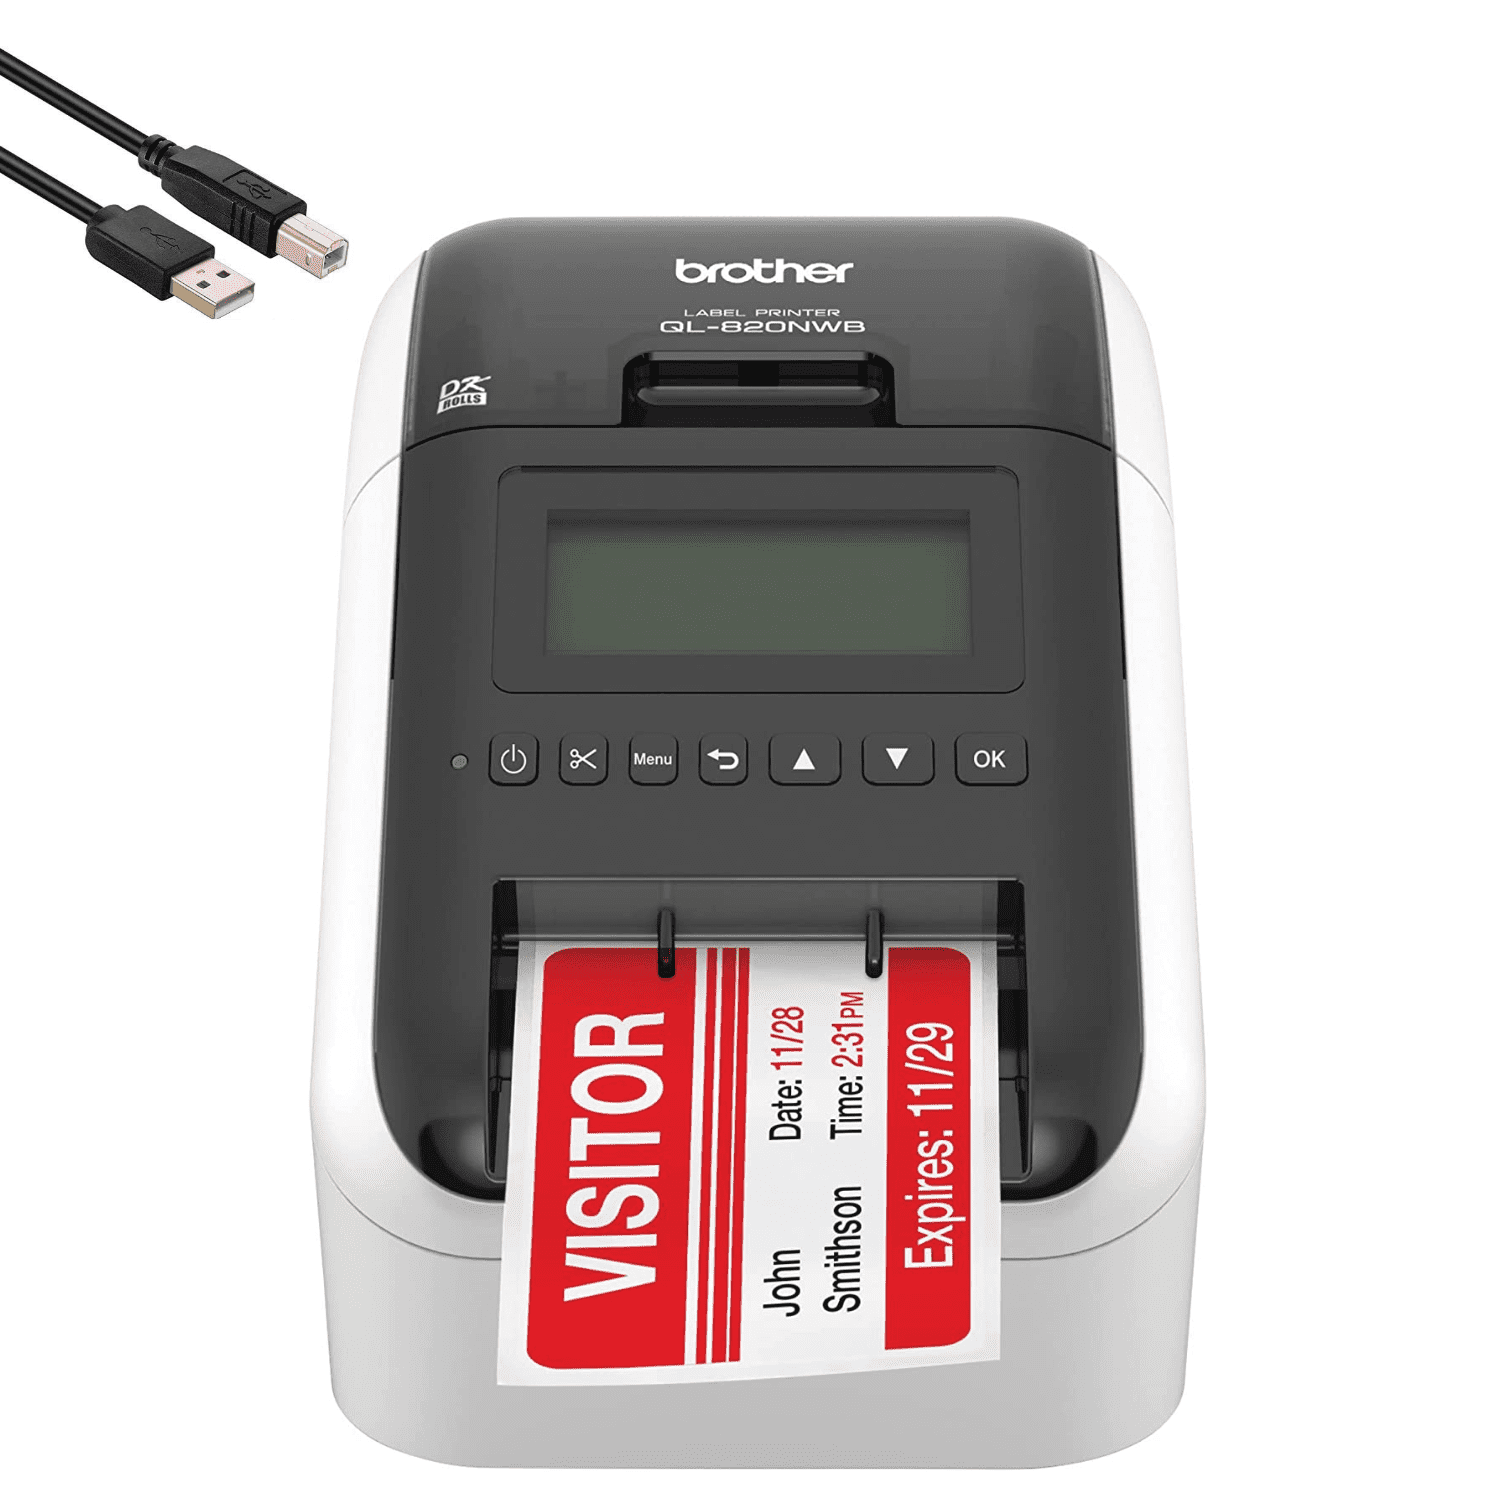 Brother QL-820NWB Professional Ultra Flexible Label Printer with Wired,  Wireless and Bluetooth Connectivity 110 Labels Per Minute, 300 x 600 dpi,  LCD Display, Auto Cut,4 Feet USB PrinterCable